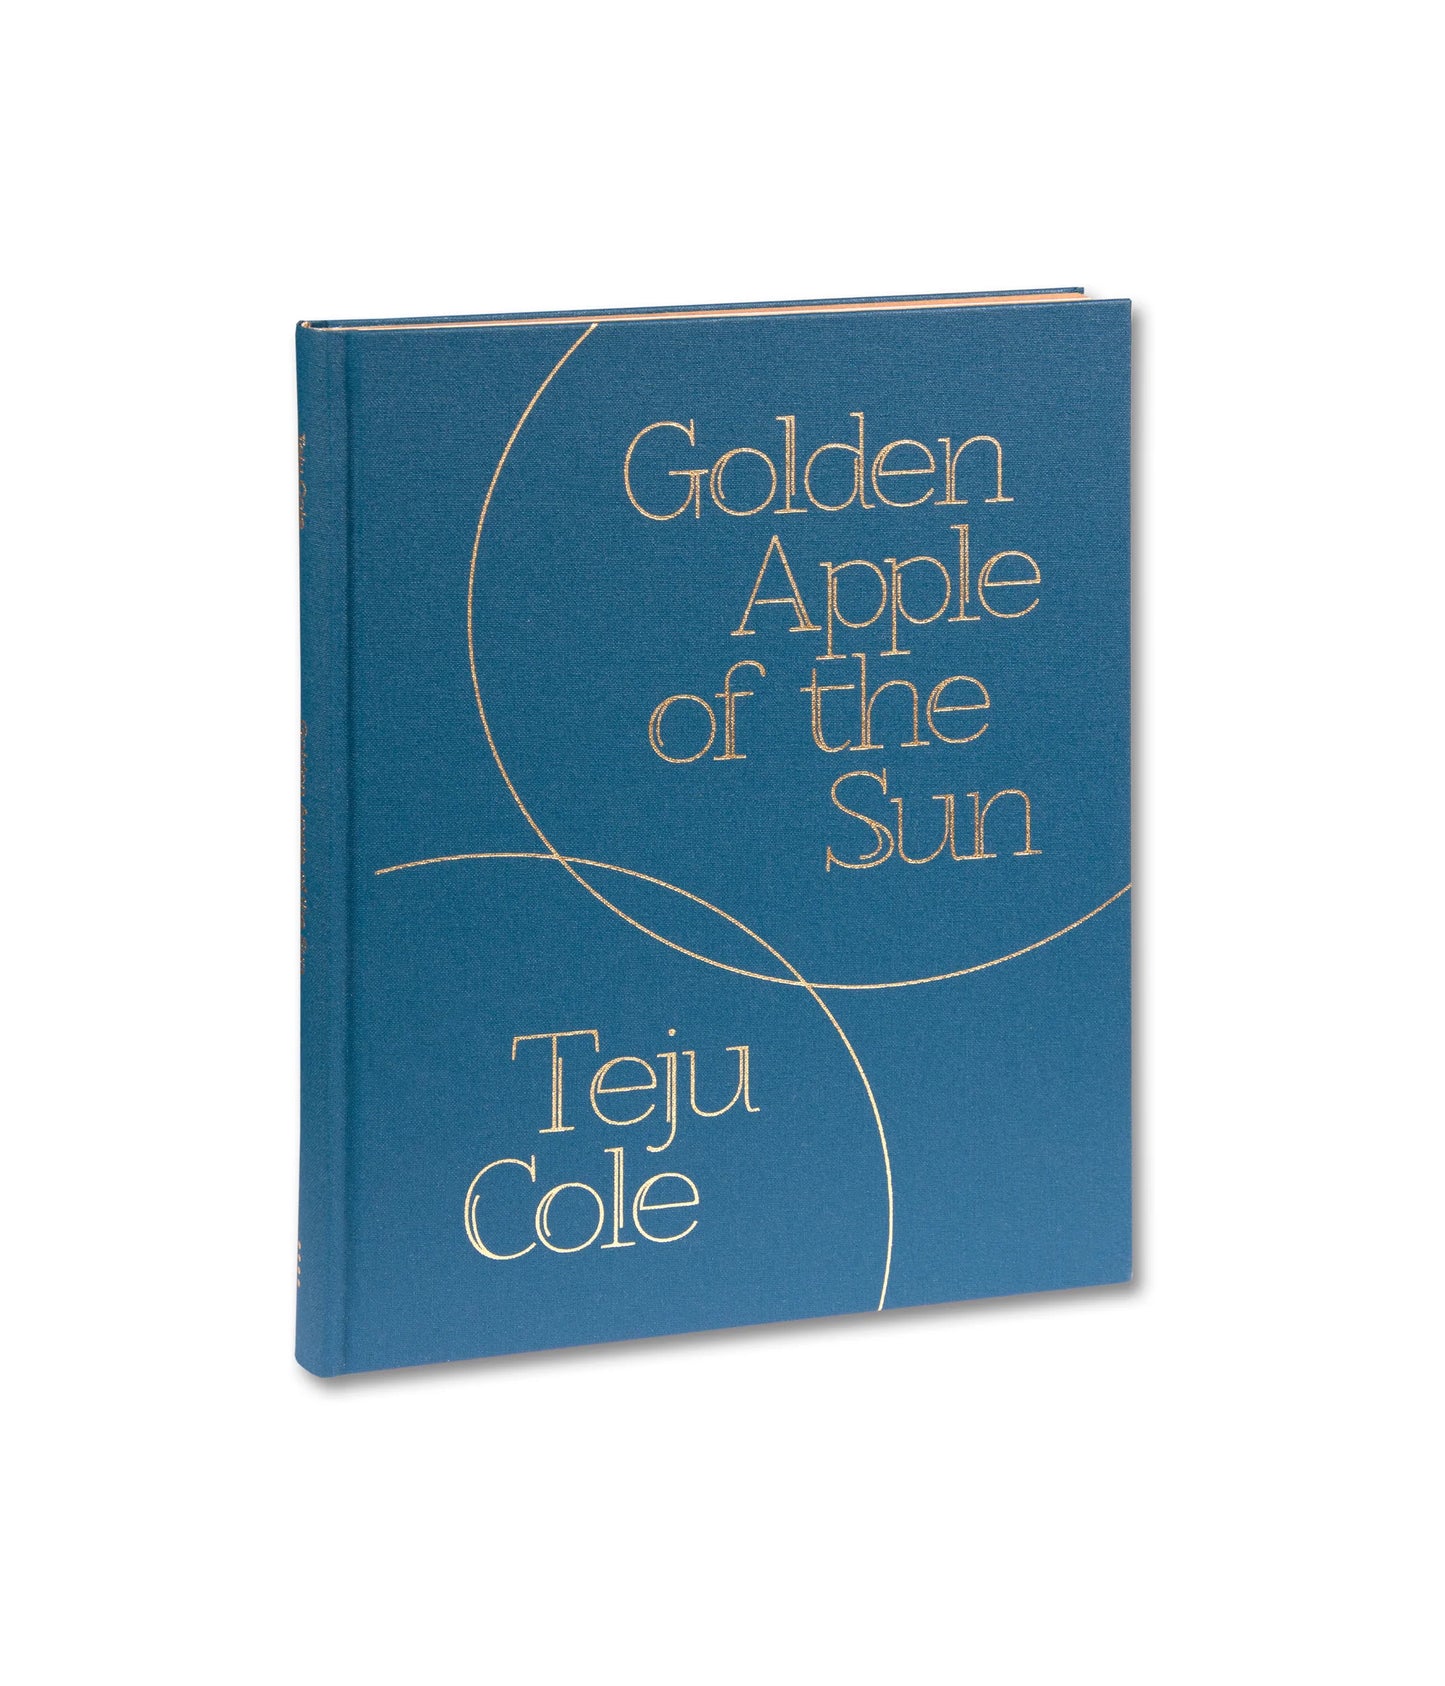 Golden Apple of the Sun by Teju Cole Photo Museum Ireland